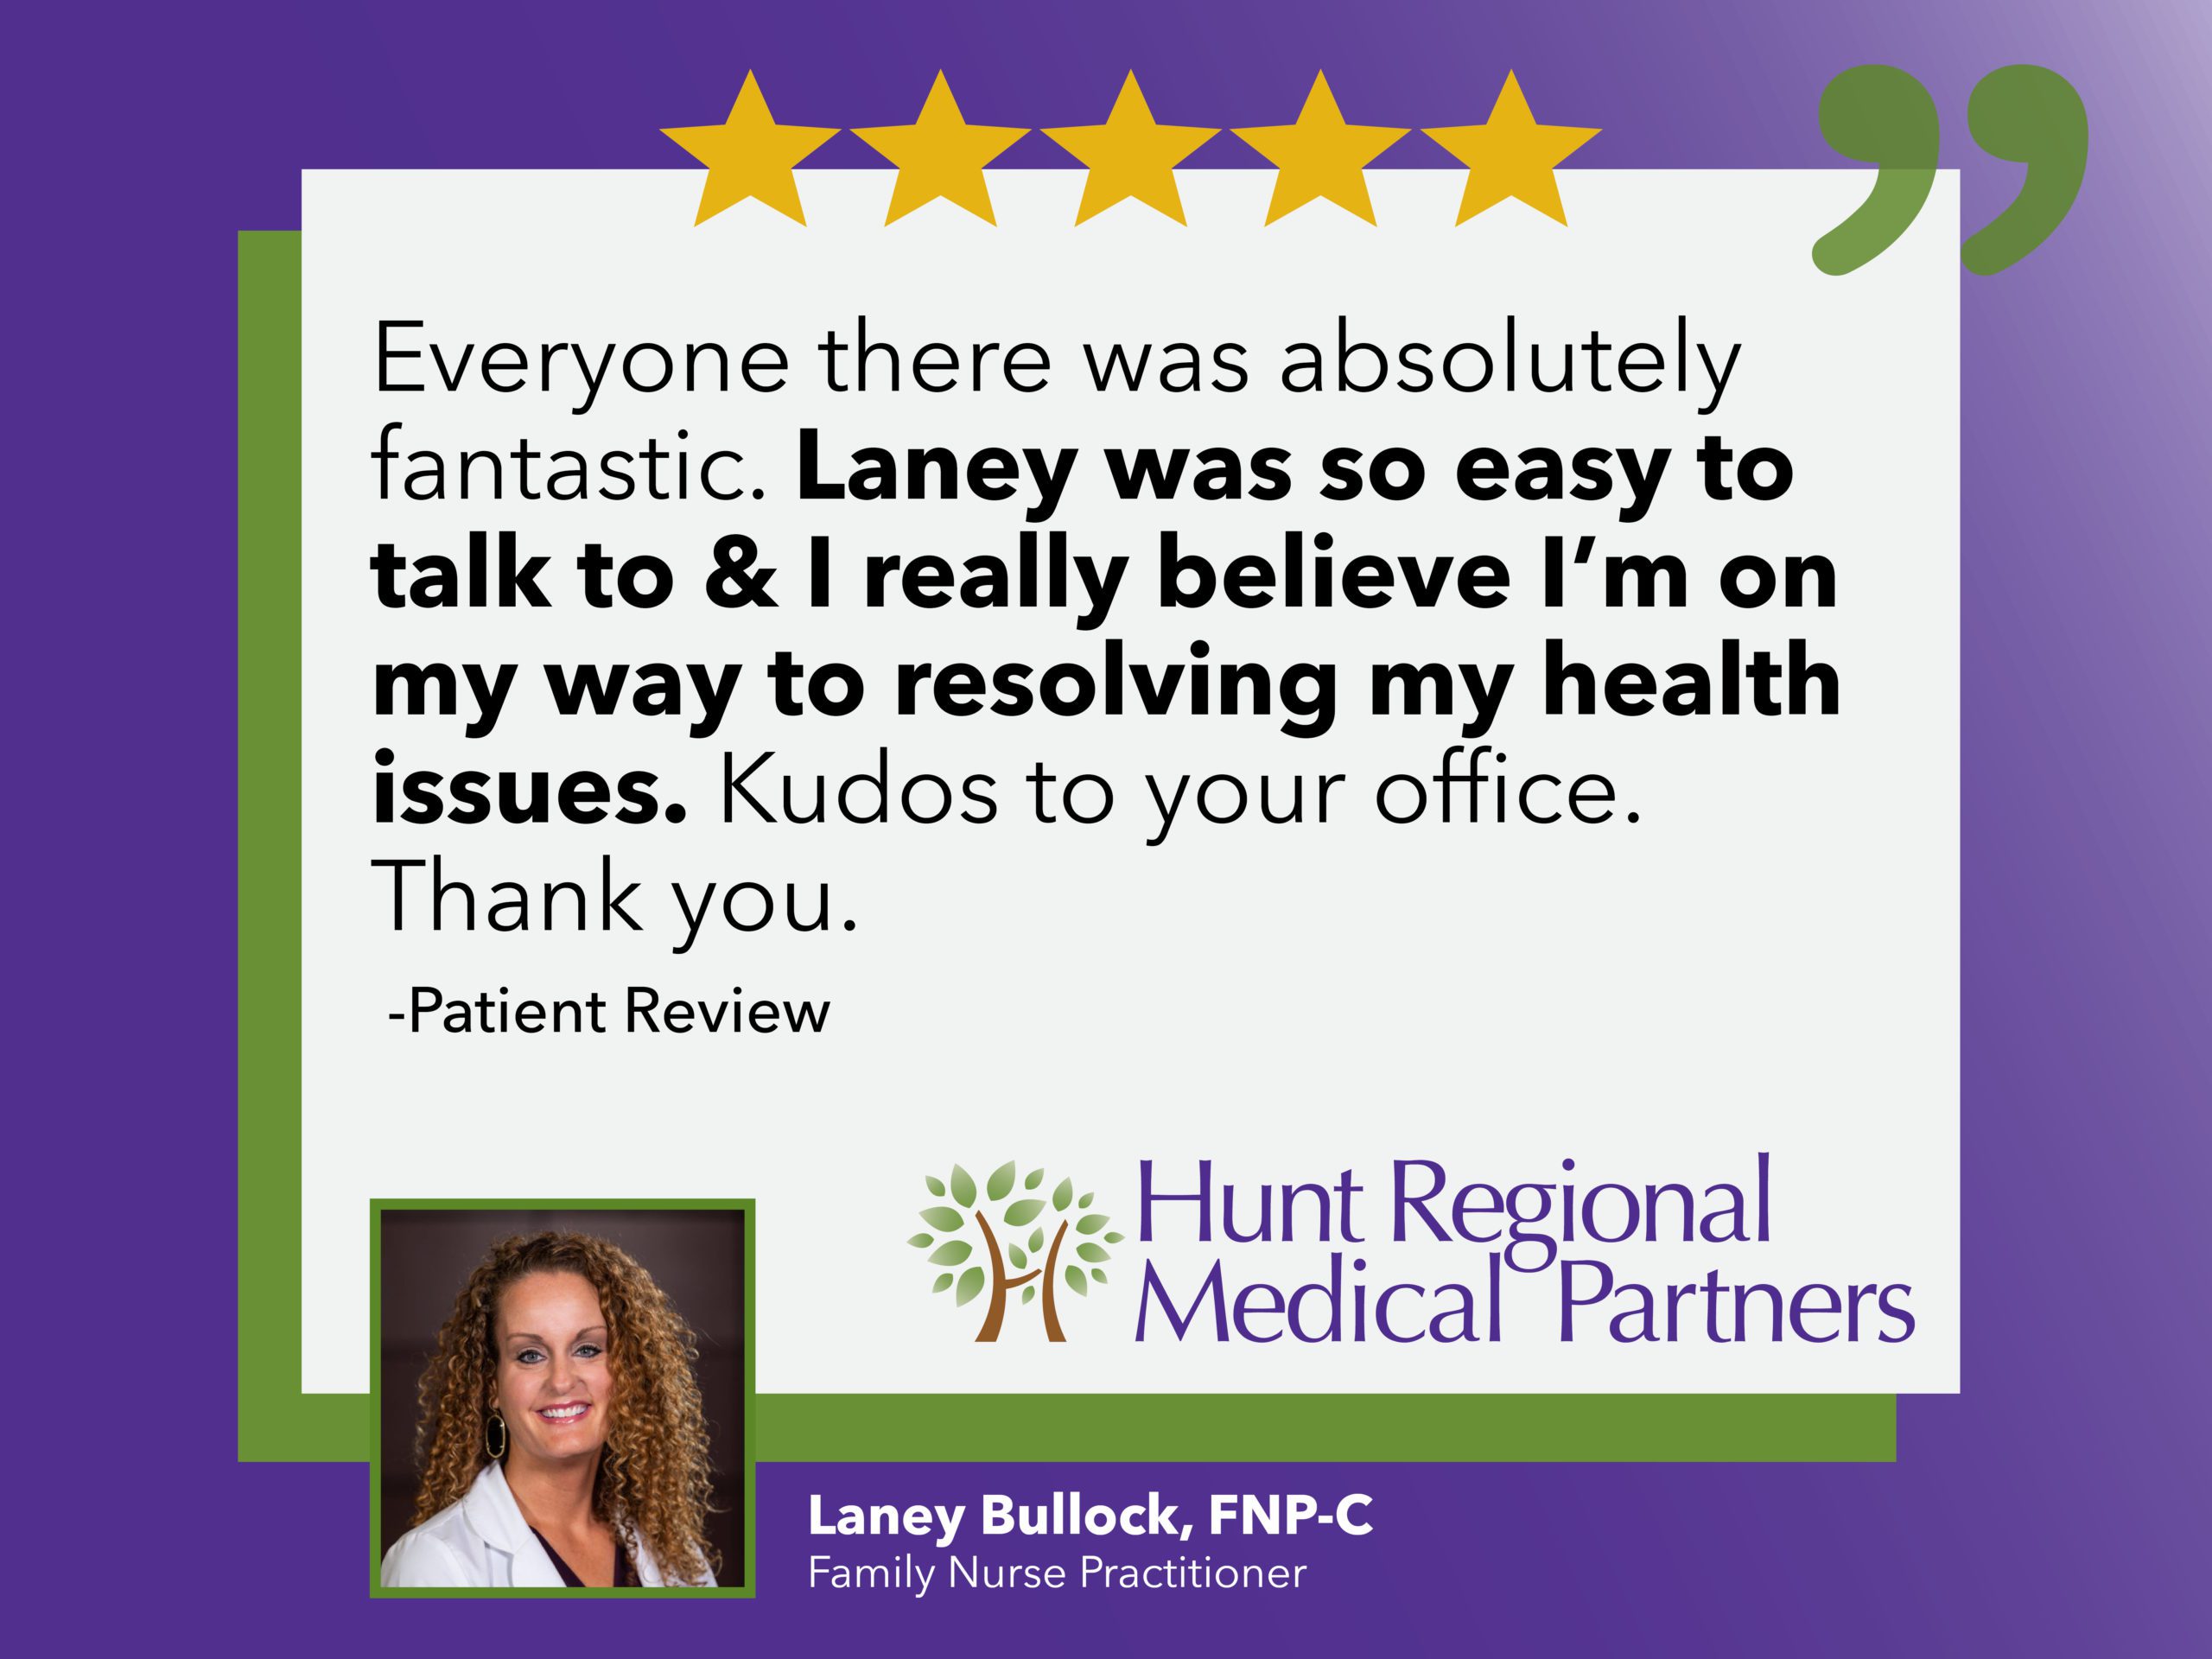 Everyone there was absolutely fantastic. Laney was so easy to talk to & I really believe I'm on my way to resolving my health issues. Kudos to your office. Thank you. | Patient Review | Hunt Regional Medical Partners | Laney Bullock, FNP-C | Family Nurse Practitioner